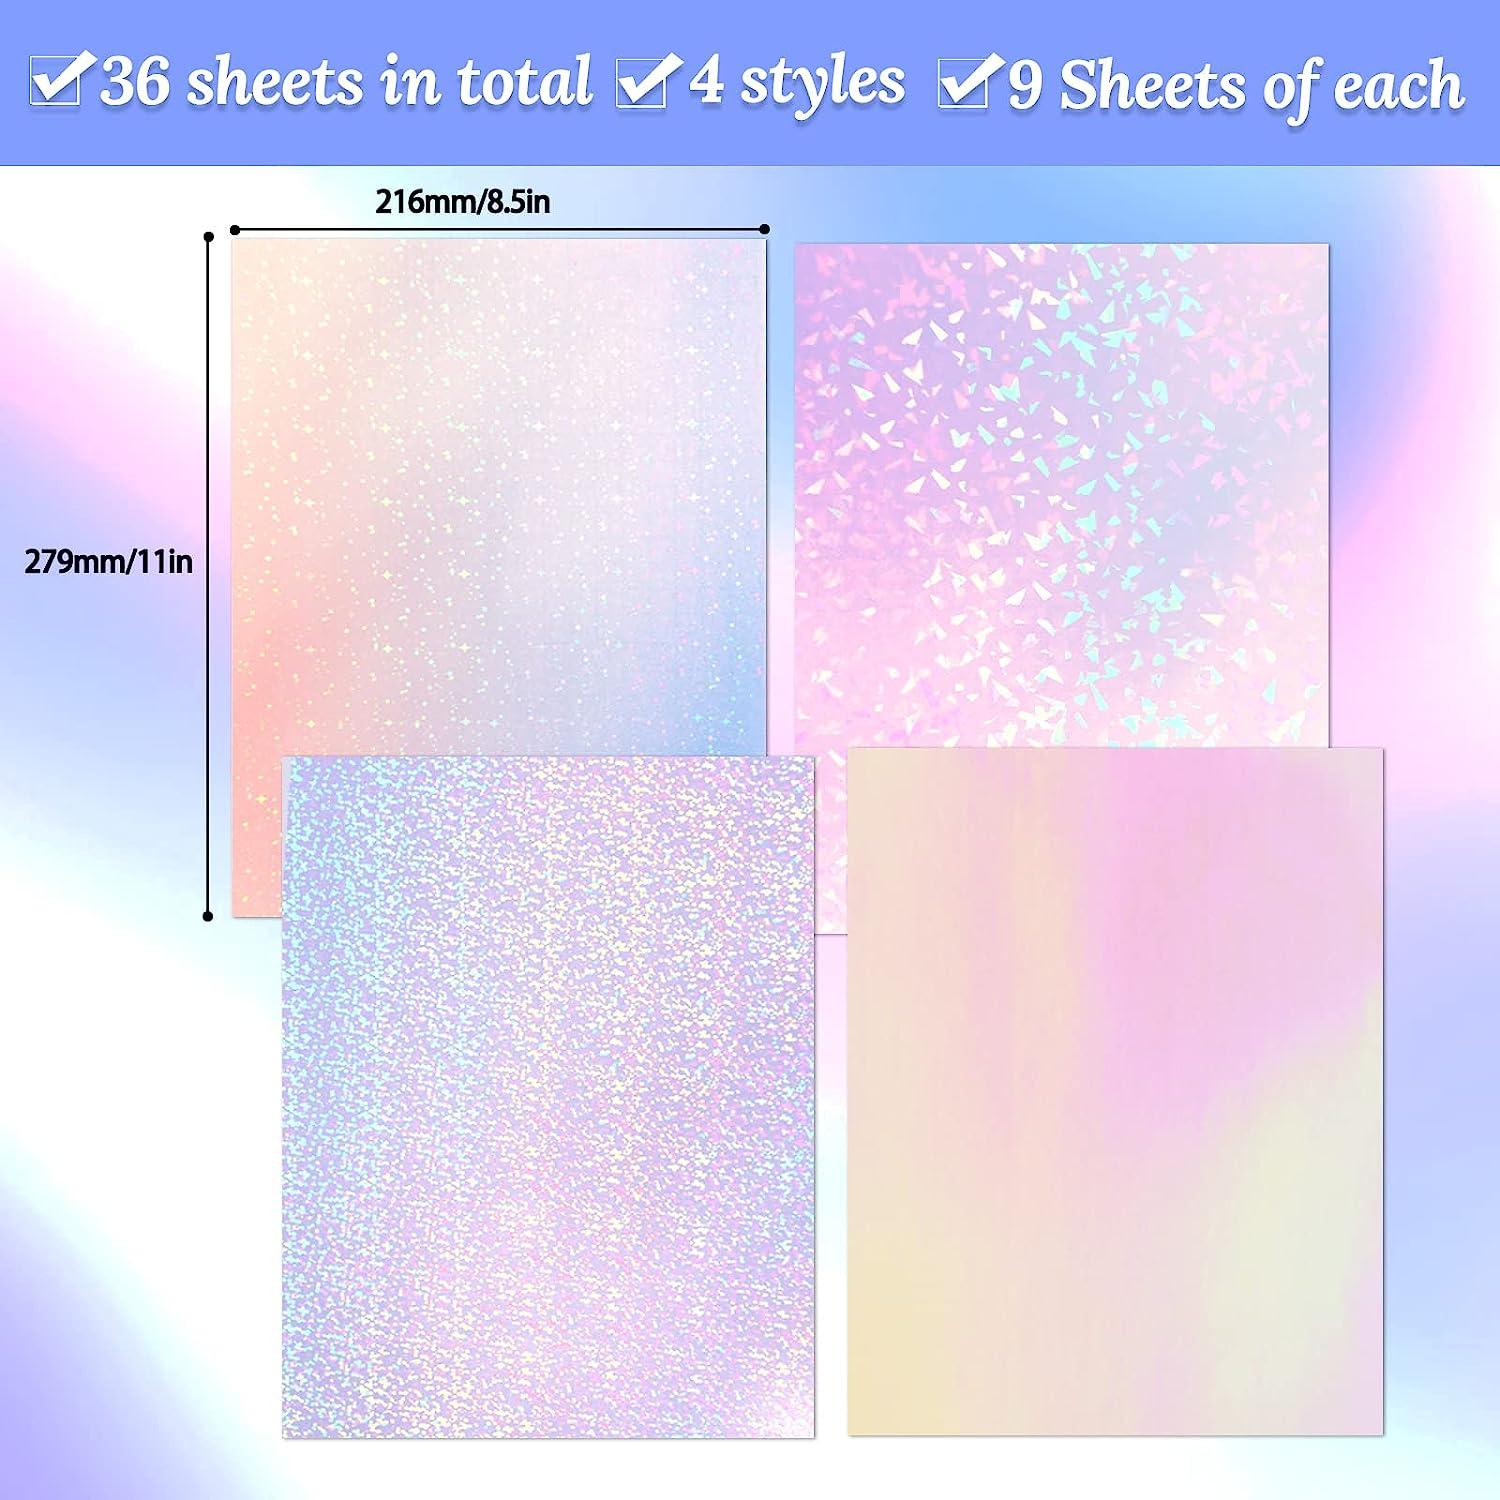 PIXEL Holographic Overlay Film 5 Sheets